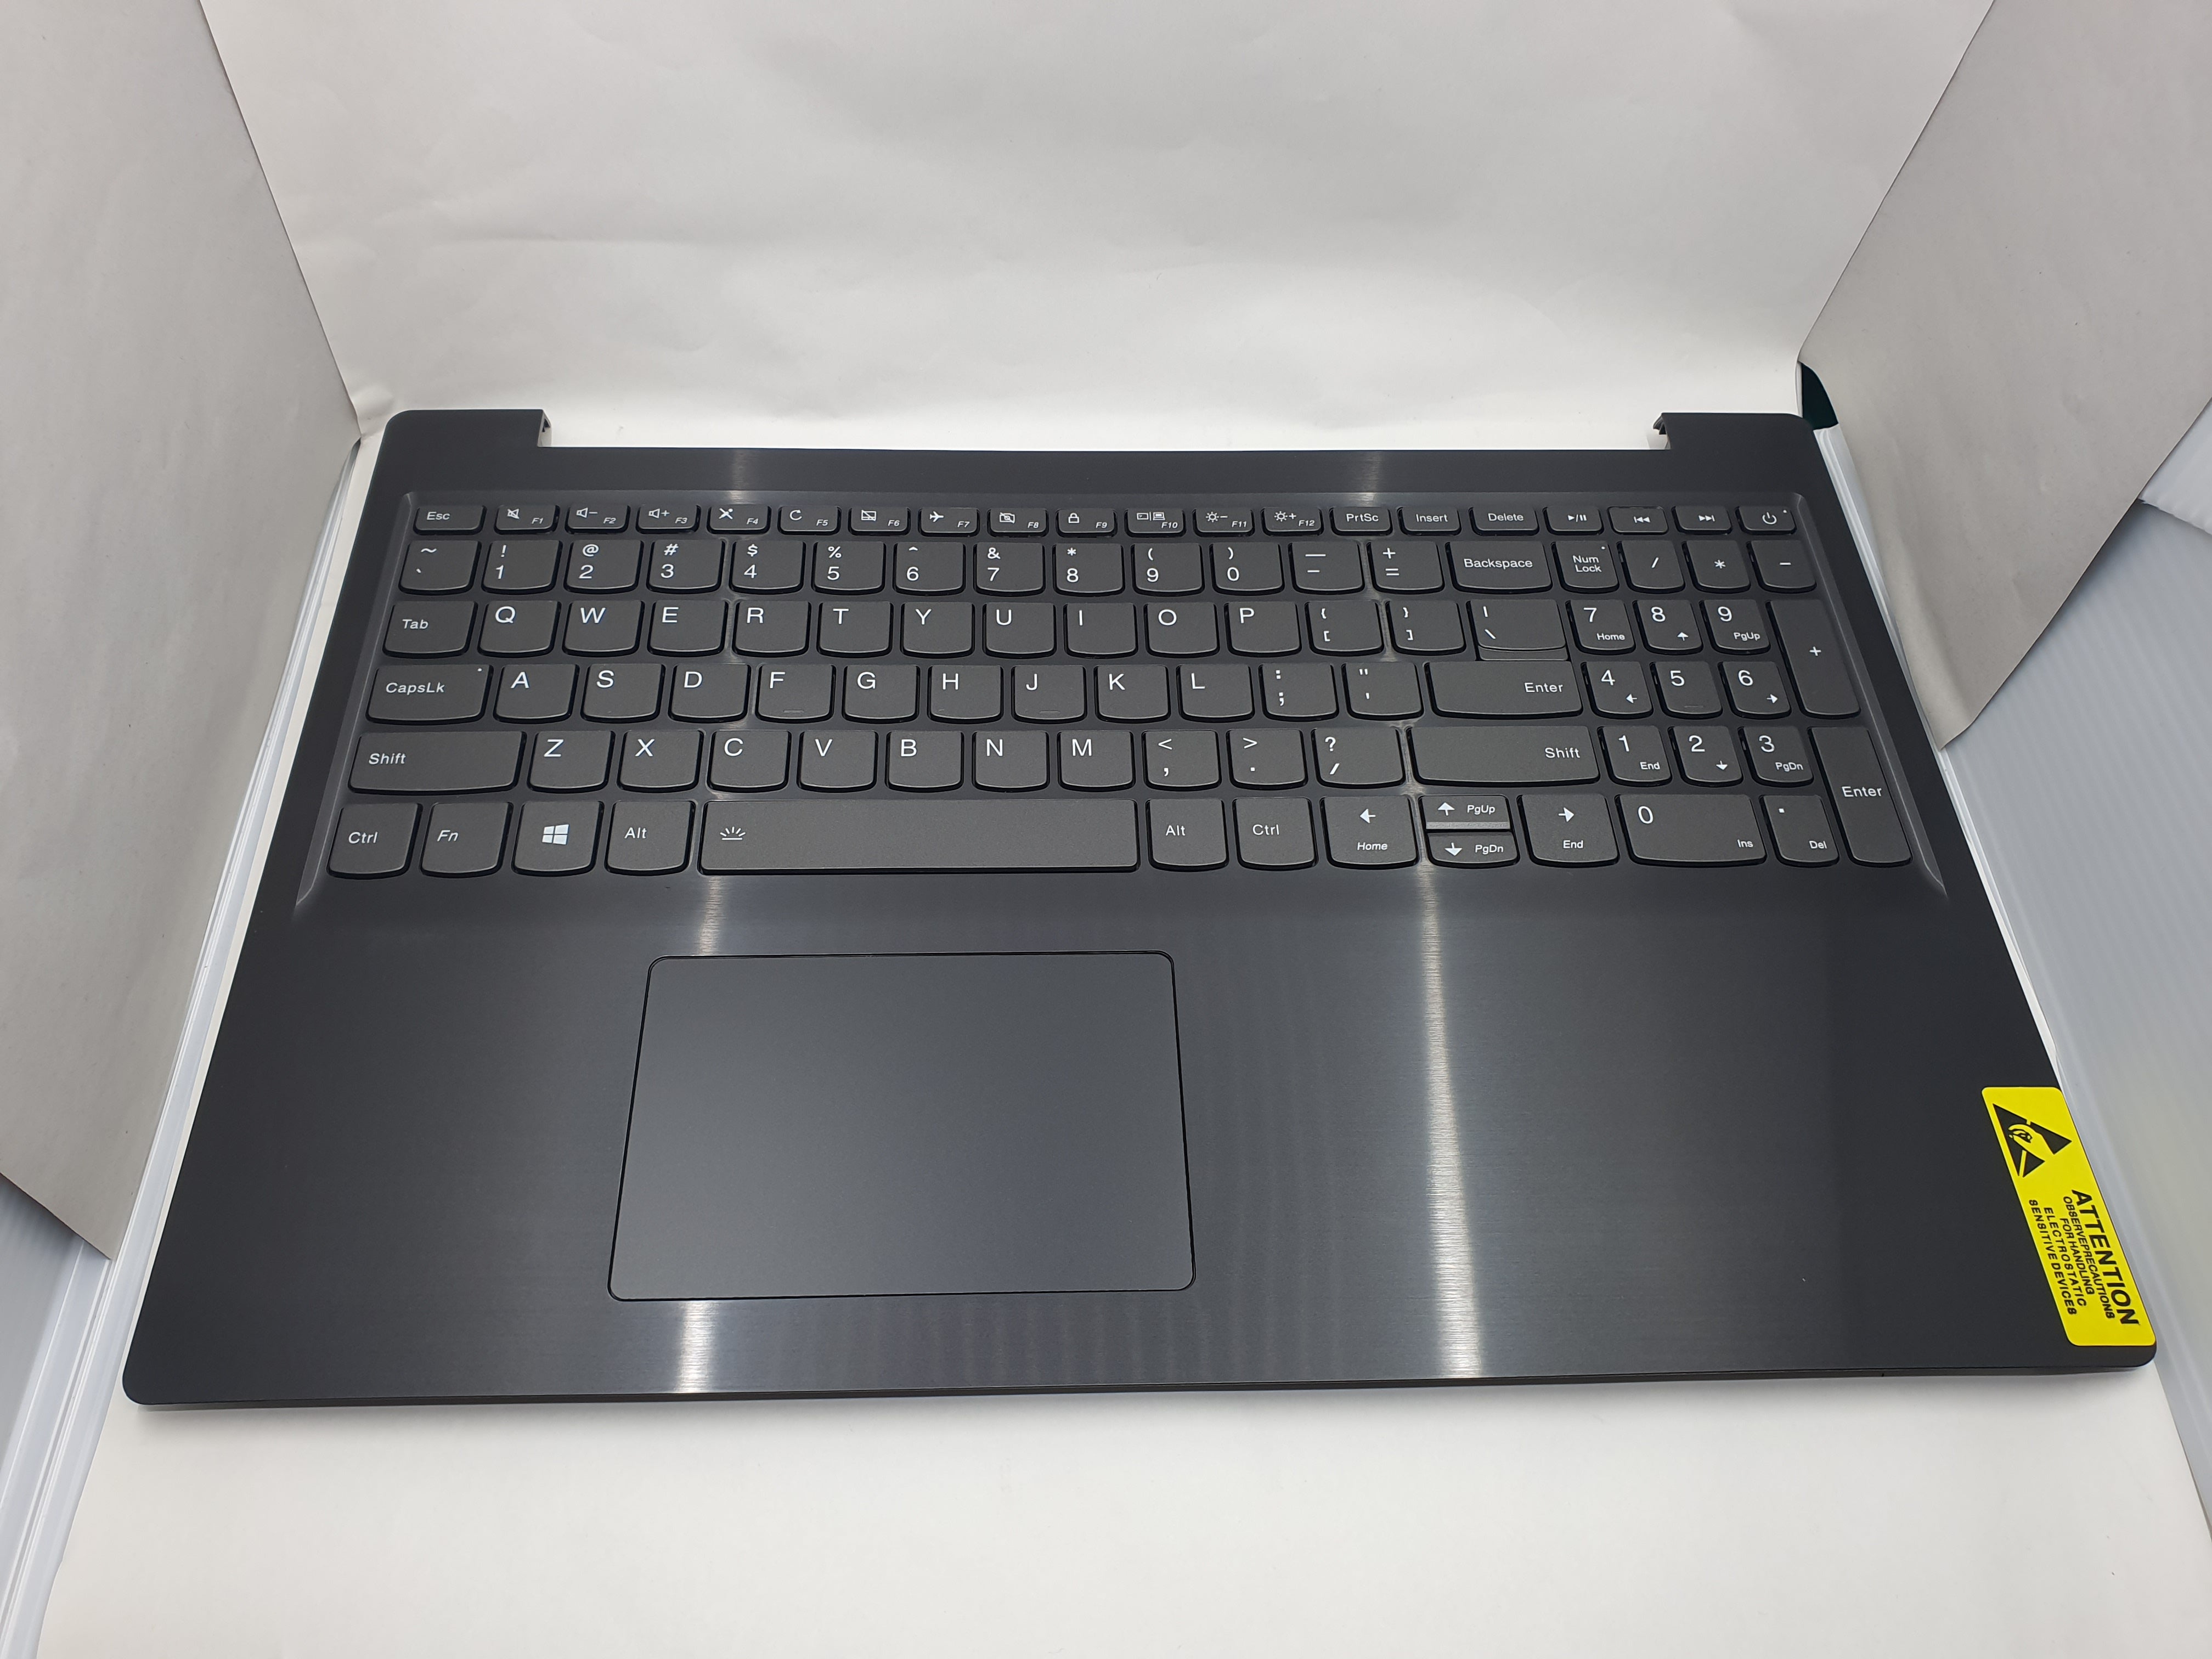 Lenovo Keyboard S145-15IIL WL for Replacement - IdeaPad S145-15IIL